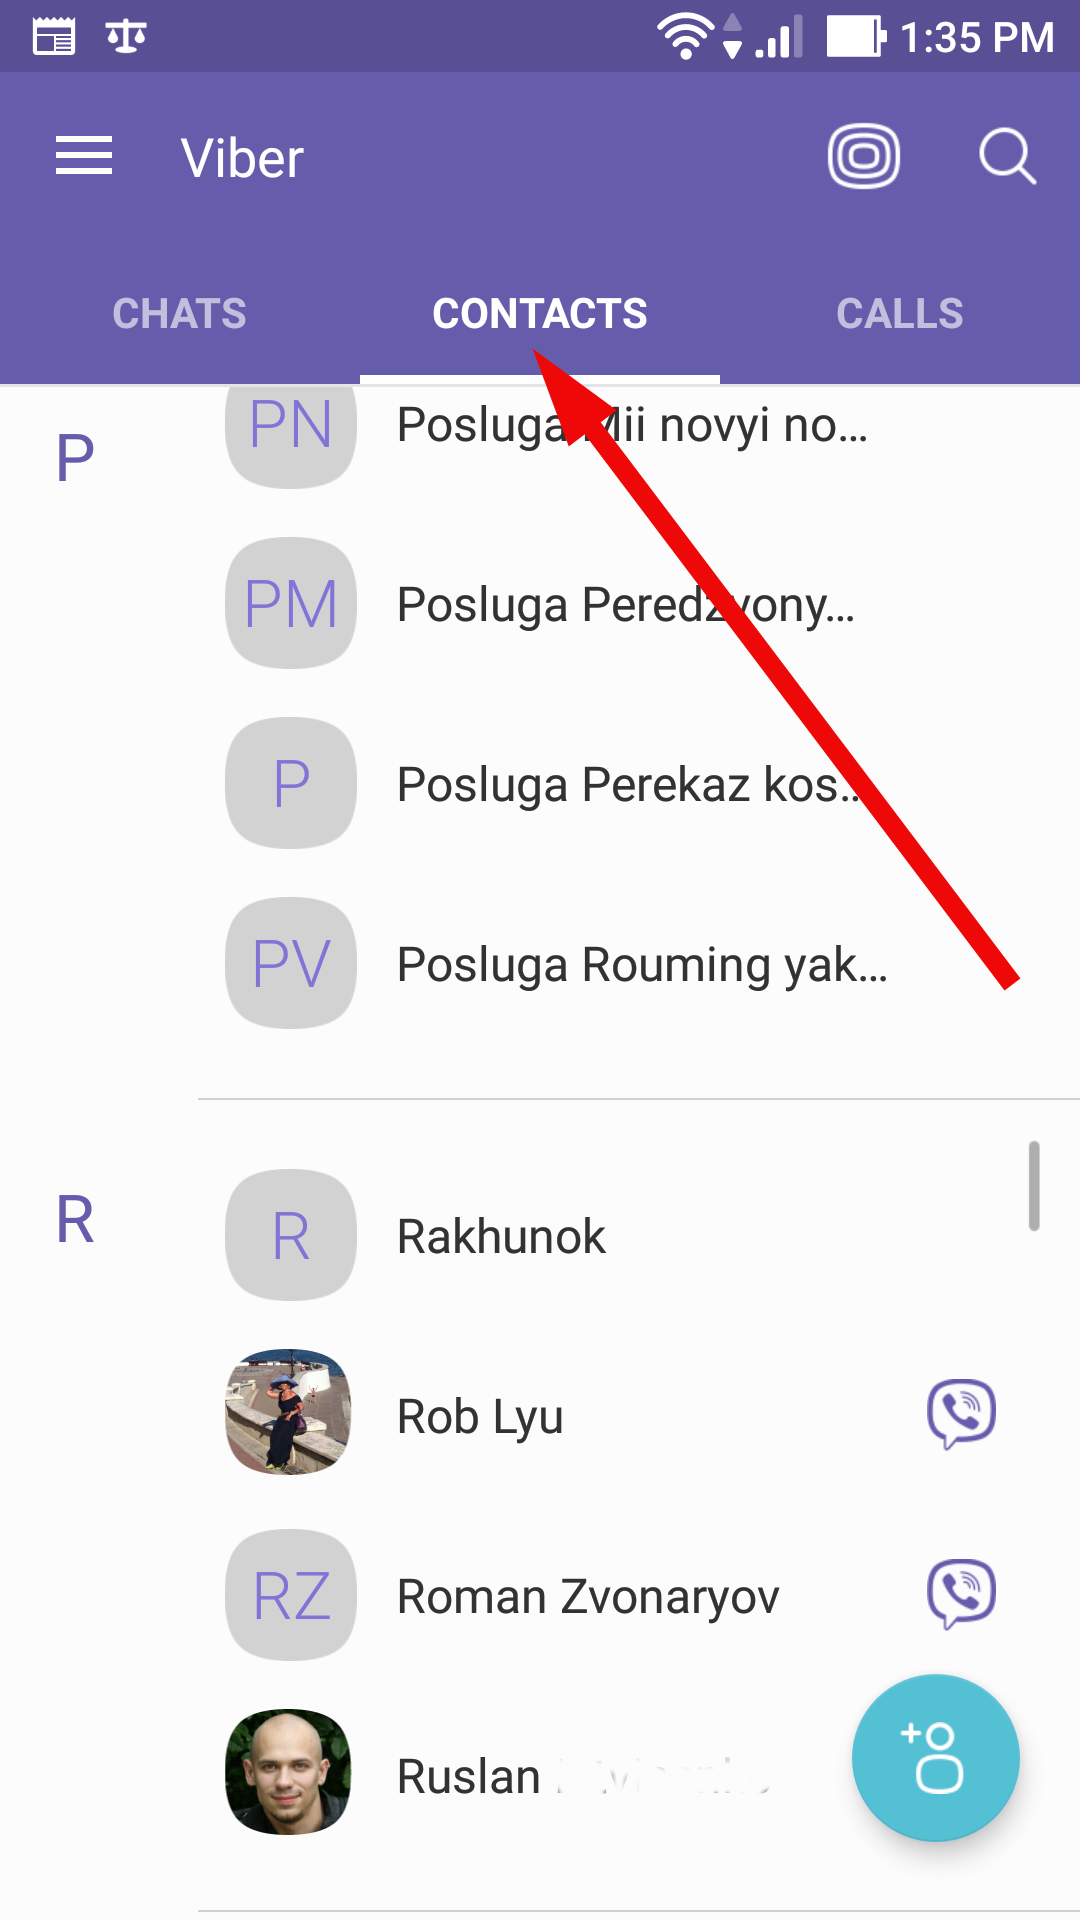 how to record viber video calls